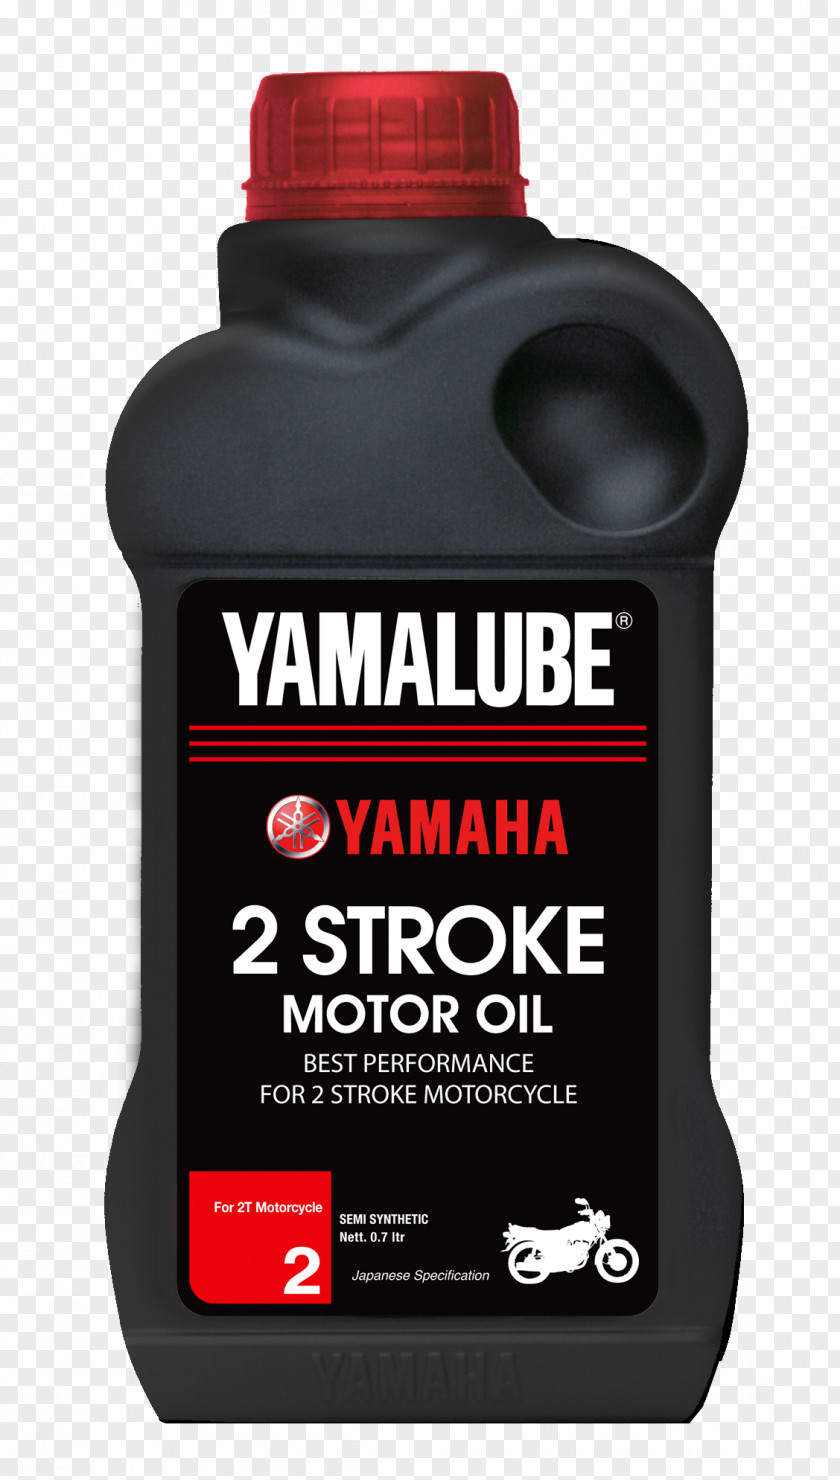 Motorcycle Motor Oil Two-stroke Engine Yamaha Corporation PNG